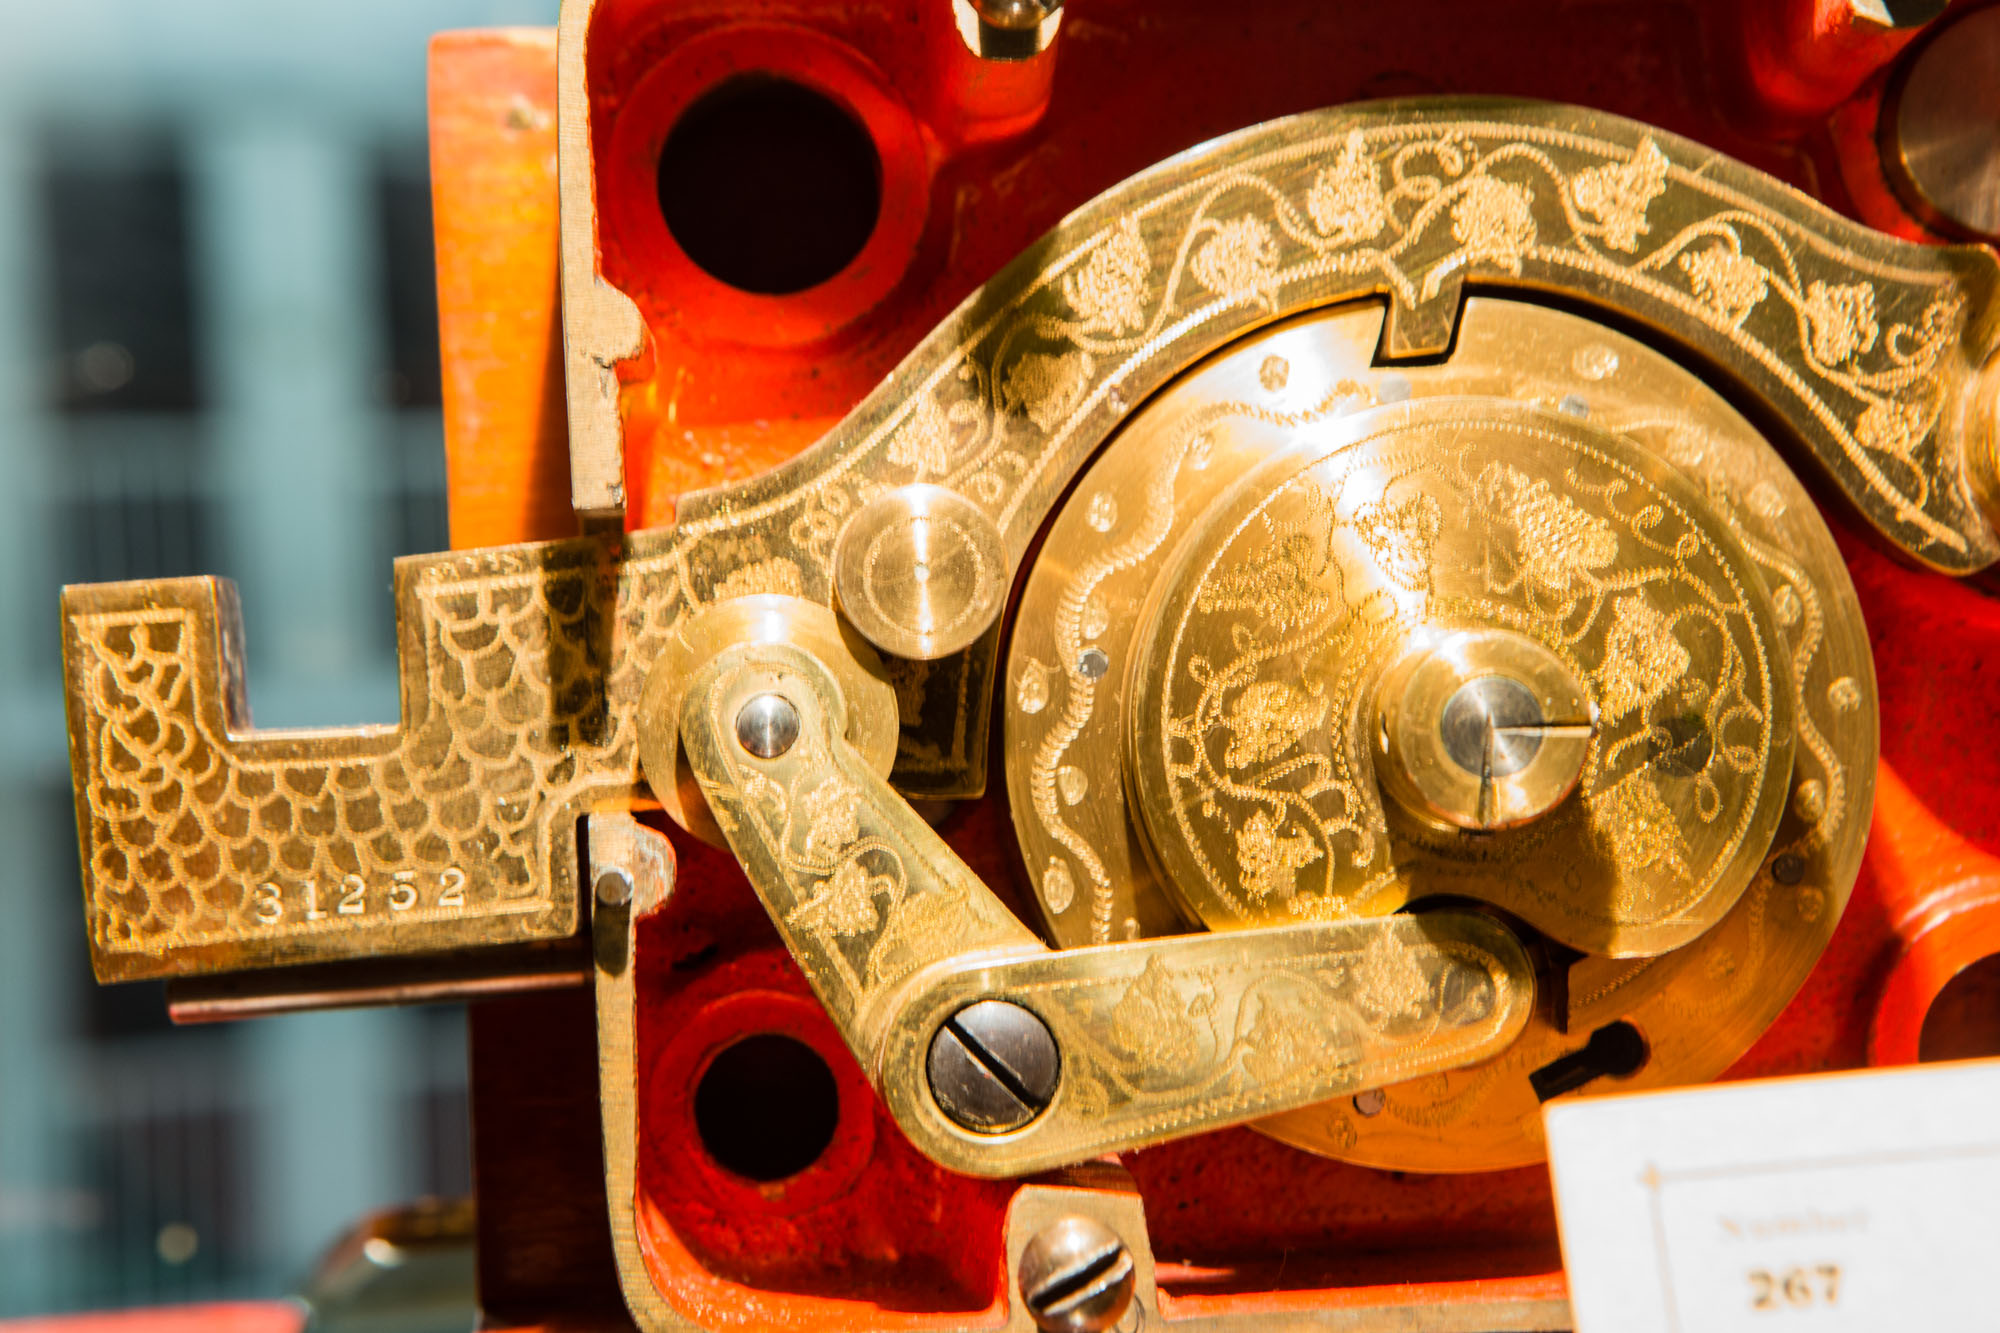 An elaborate combination lock in the John M. Mossman Lock Collection at the General Society of Mechanics & Tradesmen of the City of New York.